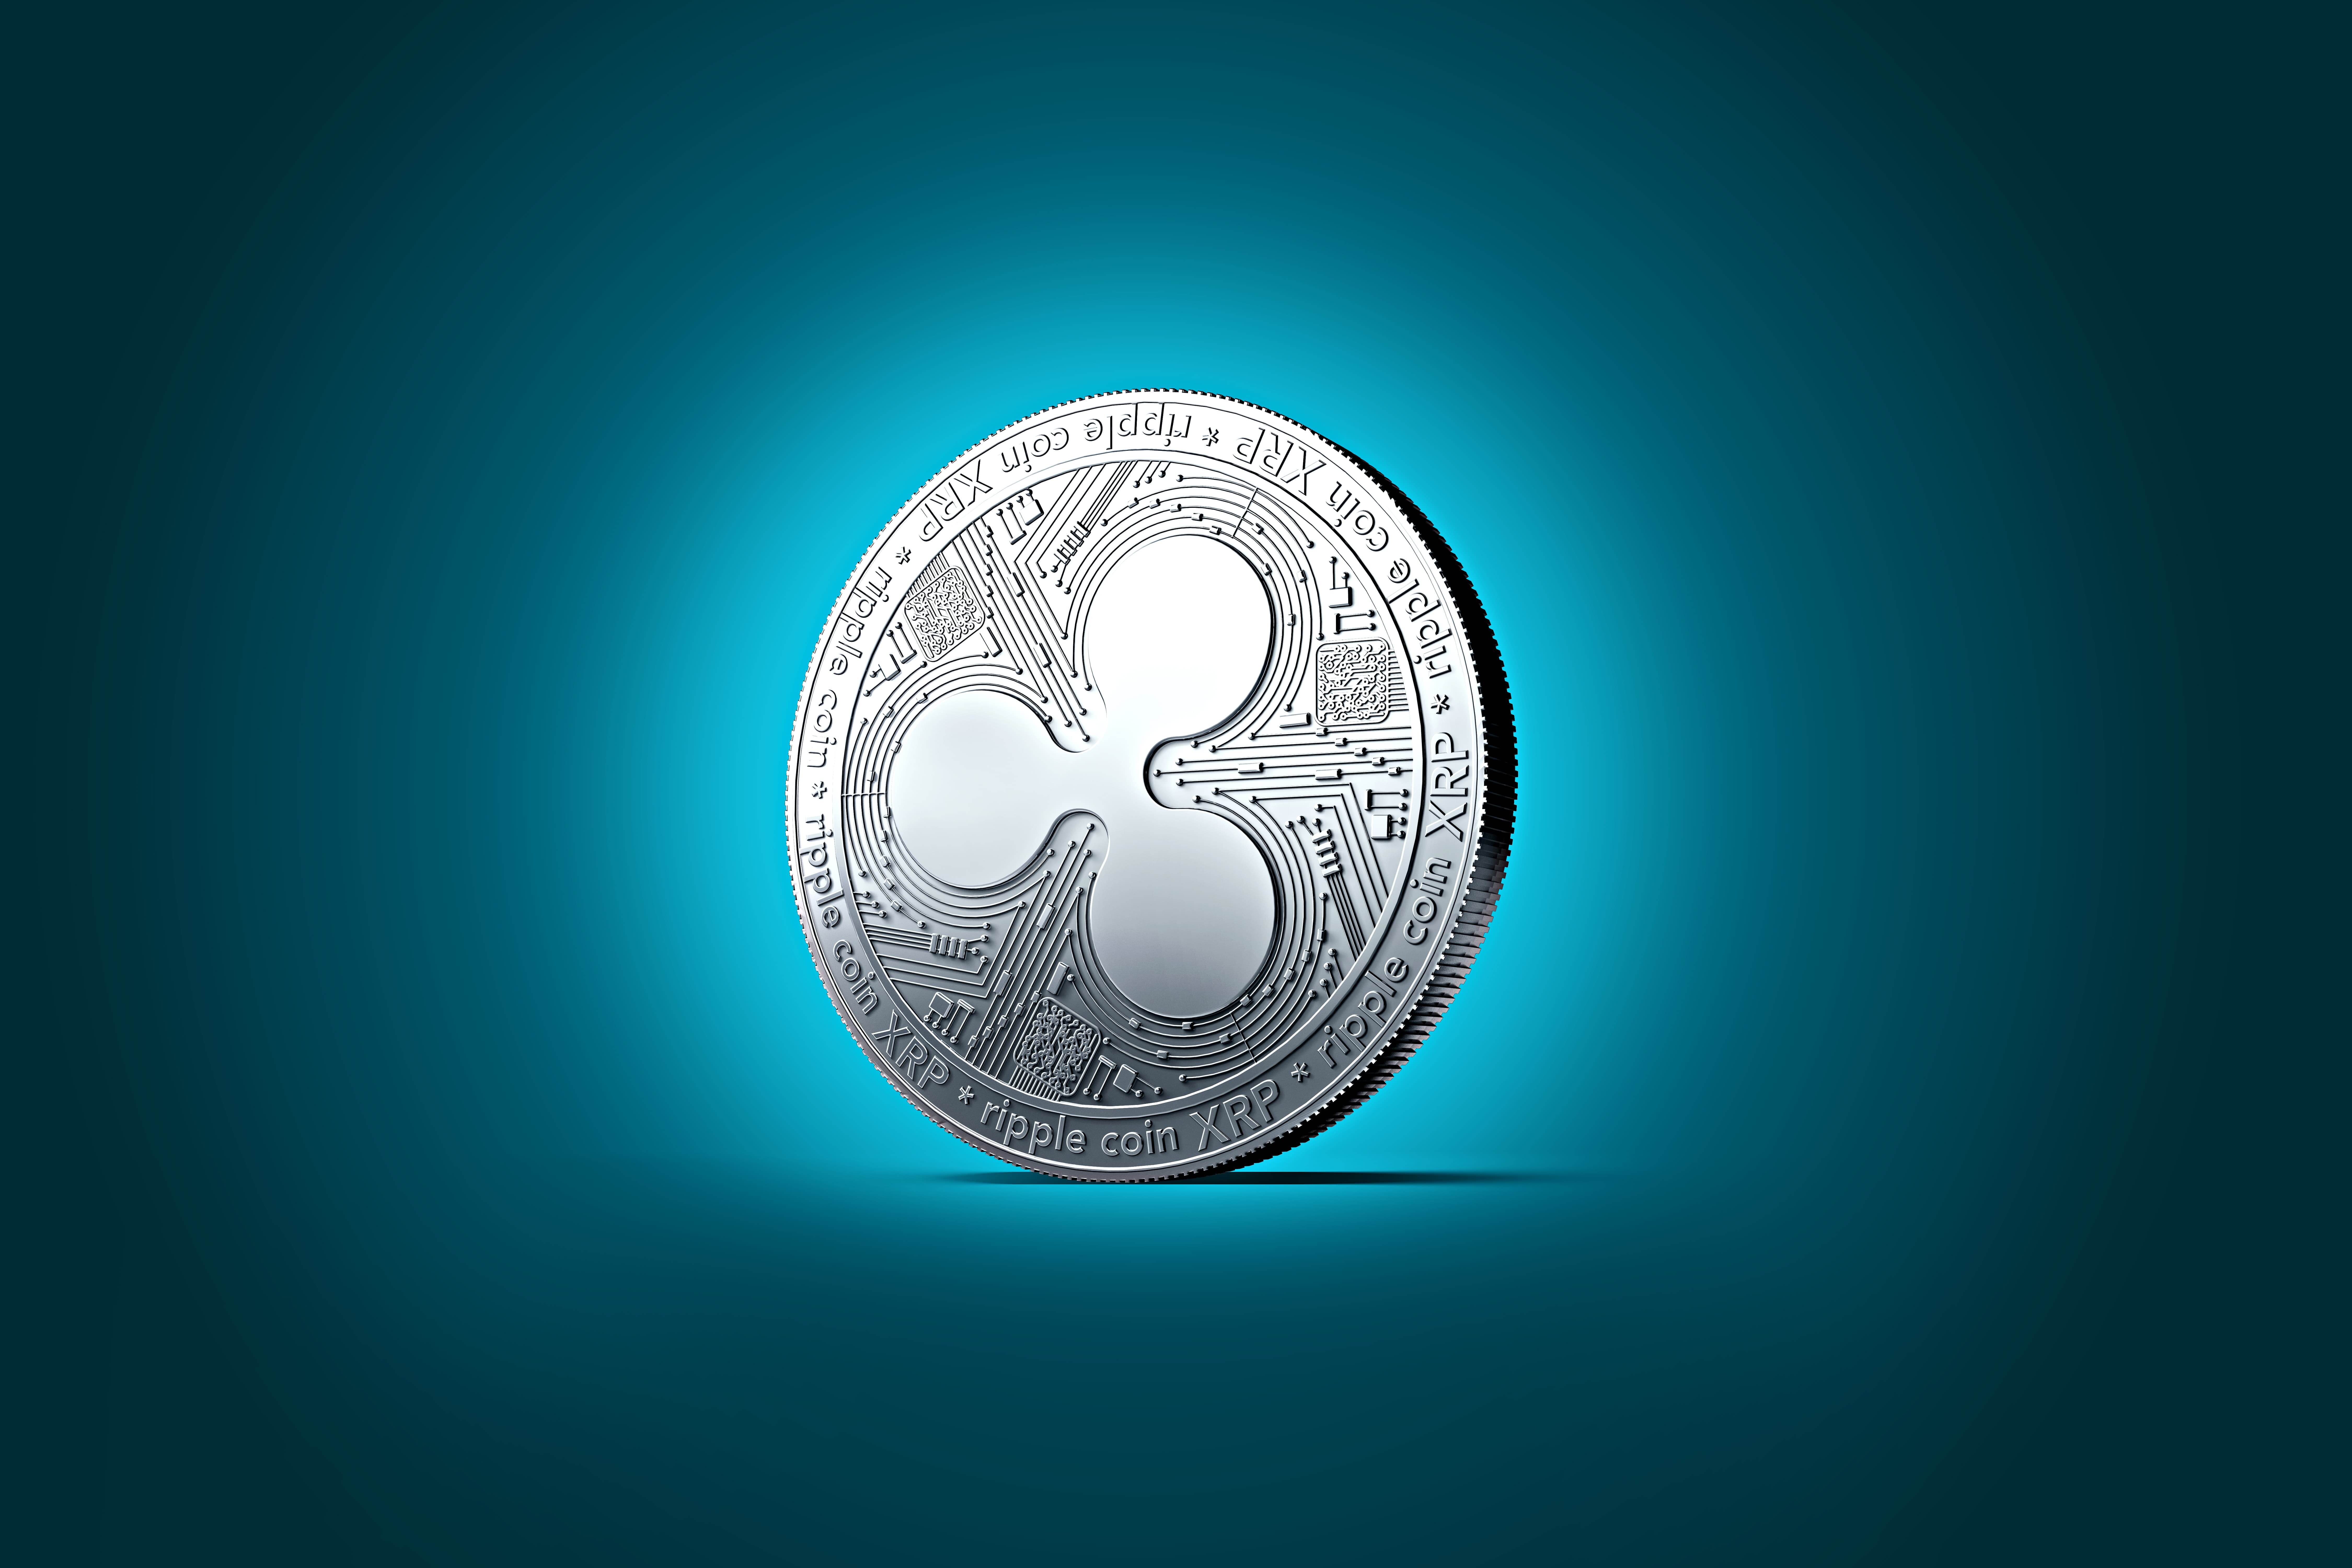 Ripple cryptocurrency owner what can i pay with bitcoin